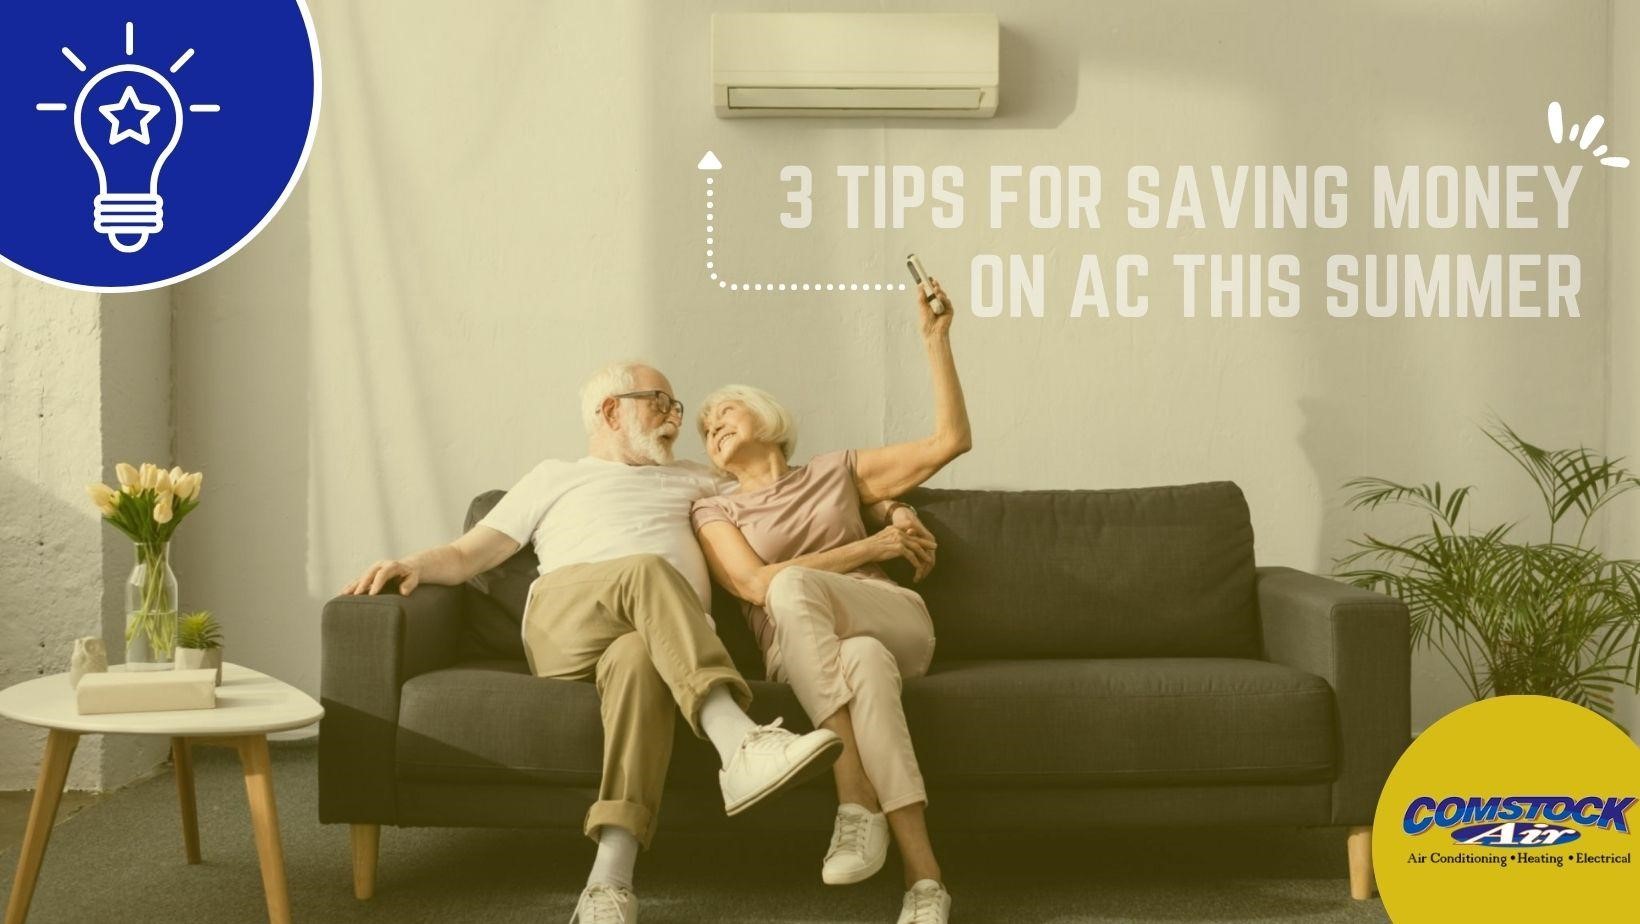 3 Tips for Saving Money on AC This Summer